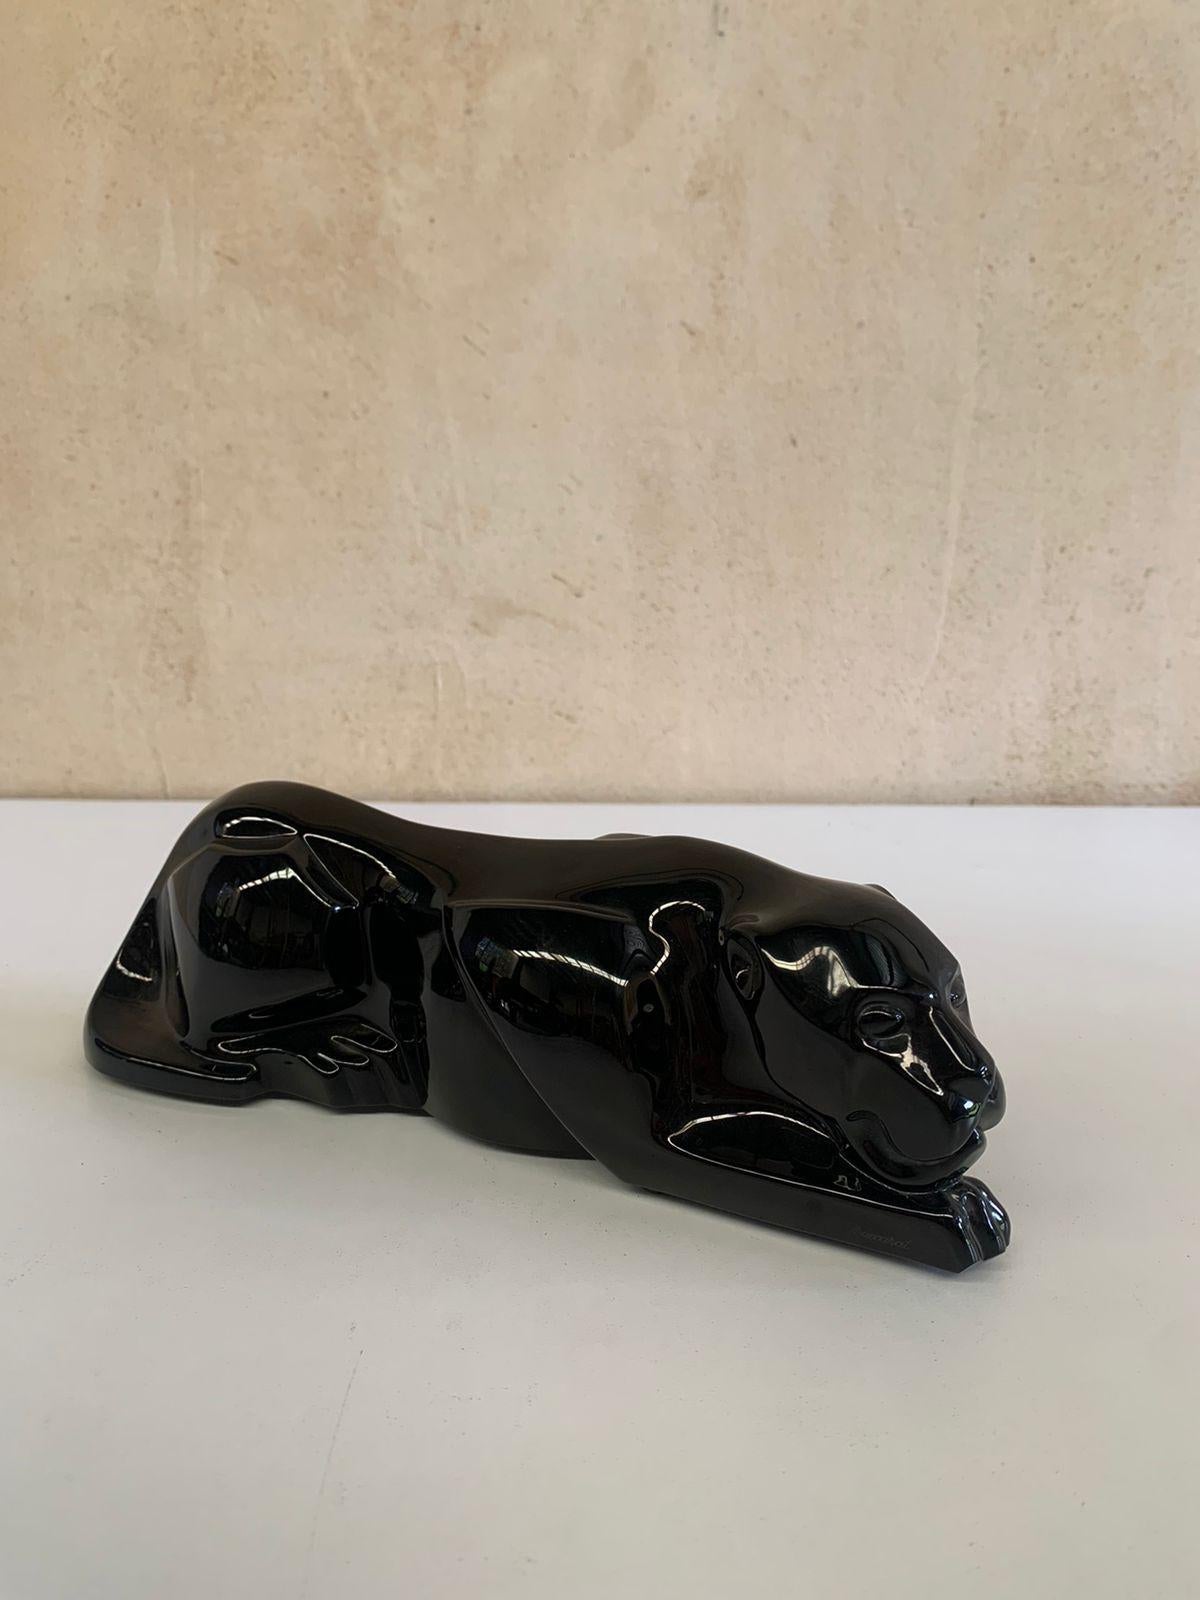 Black crystal panther sculpture by Baccarat, circa 1980s. In excellent condition.